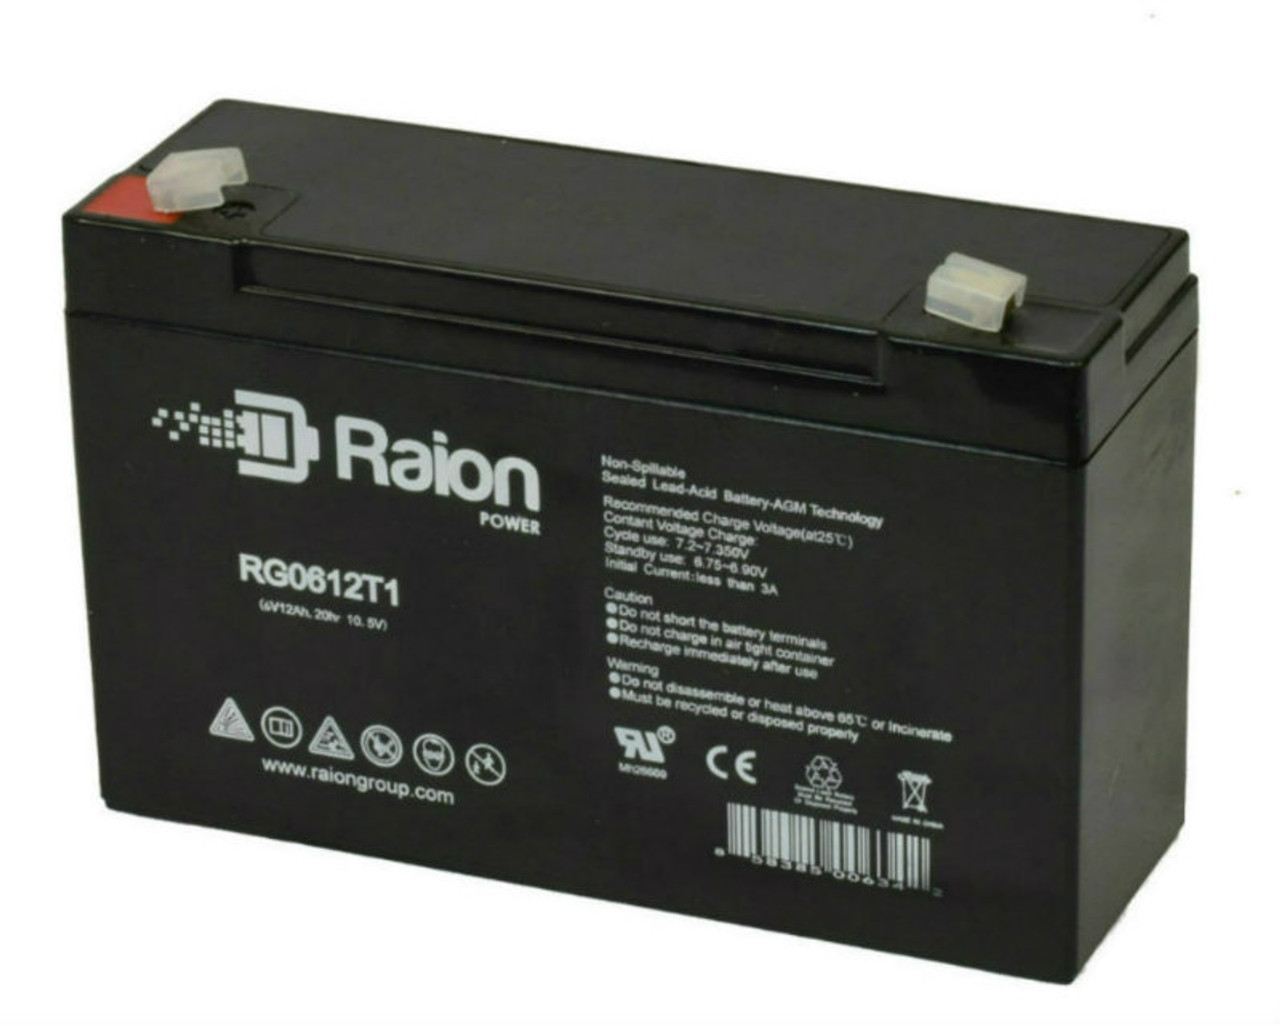 Raion Power RG06120T1 Replacement 6V 12Ah Emergency Light Battery for ELS 2SQ